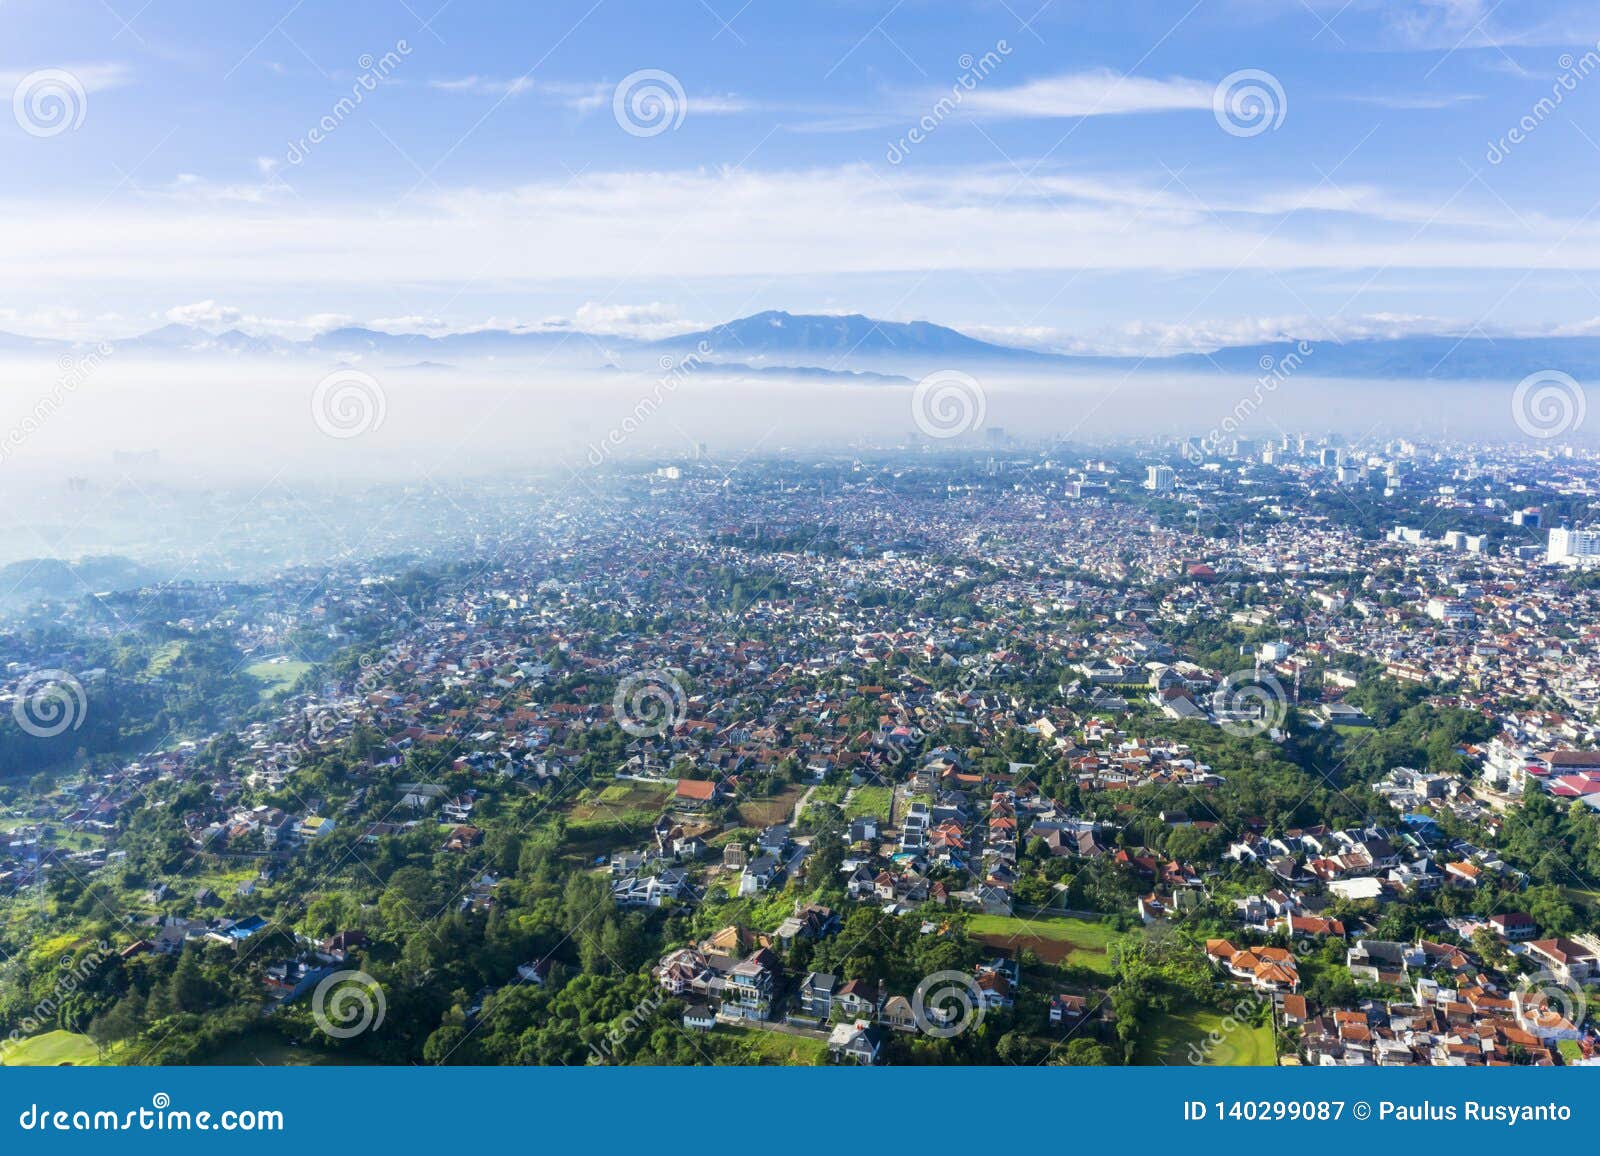 beautiful bandung cityscape with crowd houses